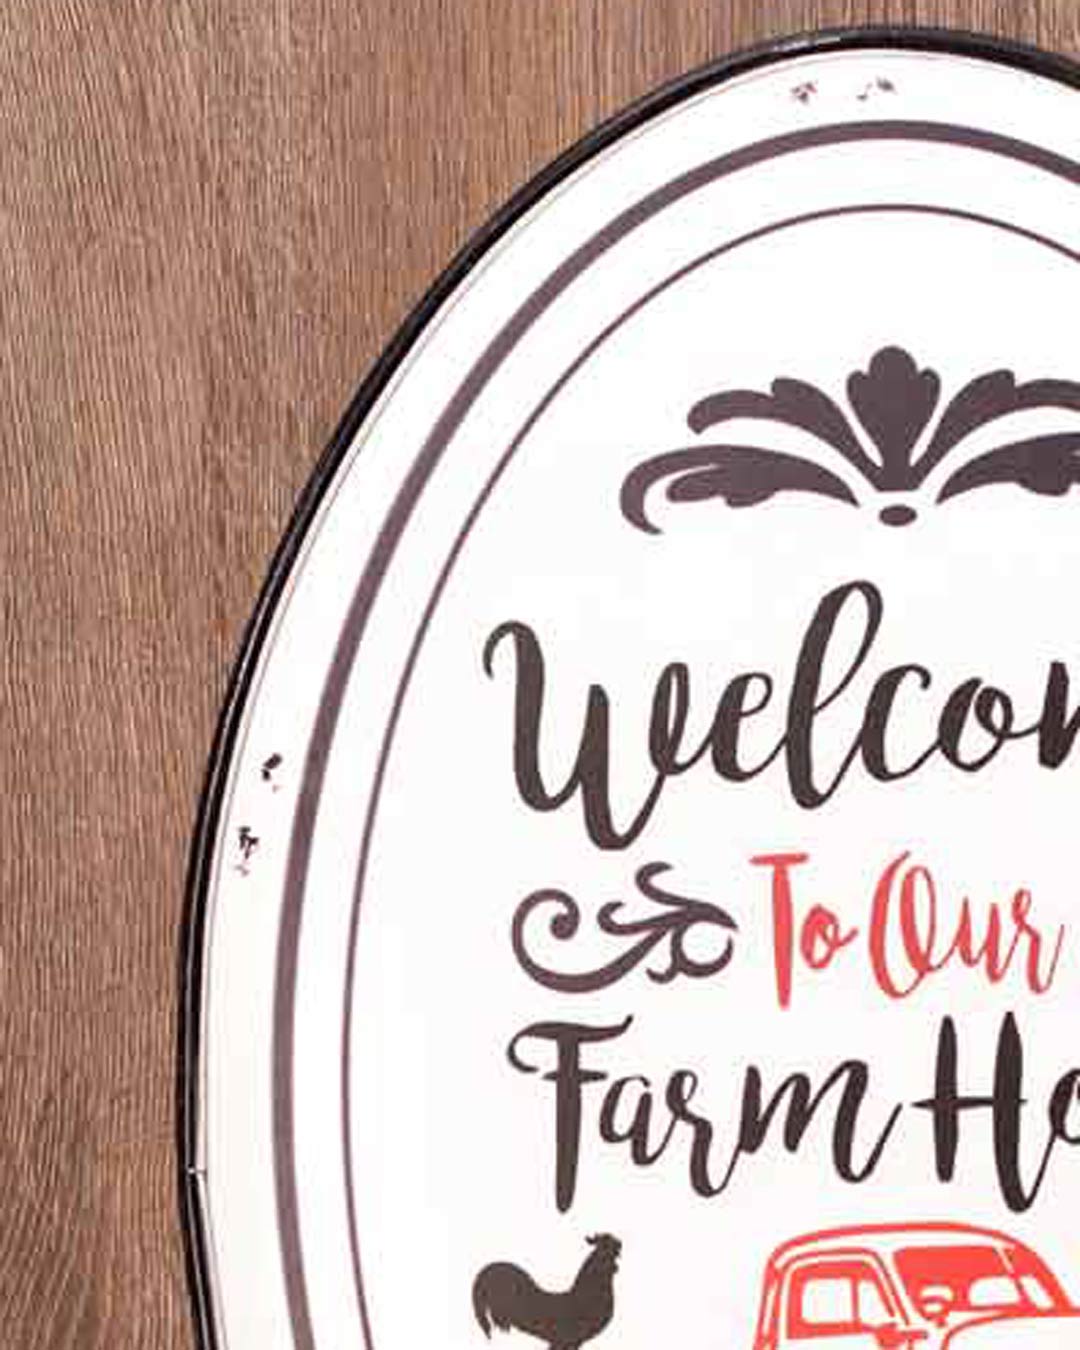 'Welcome to our Farm House' Tin Bar Sign